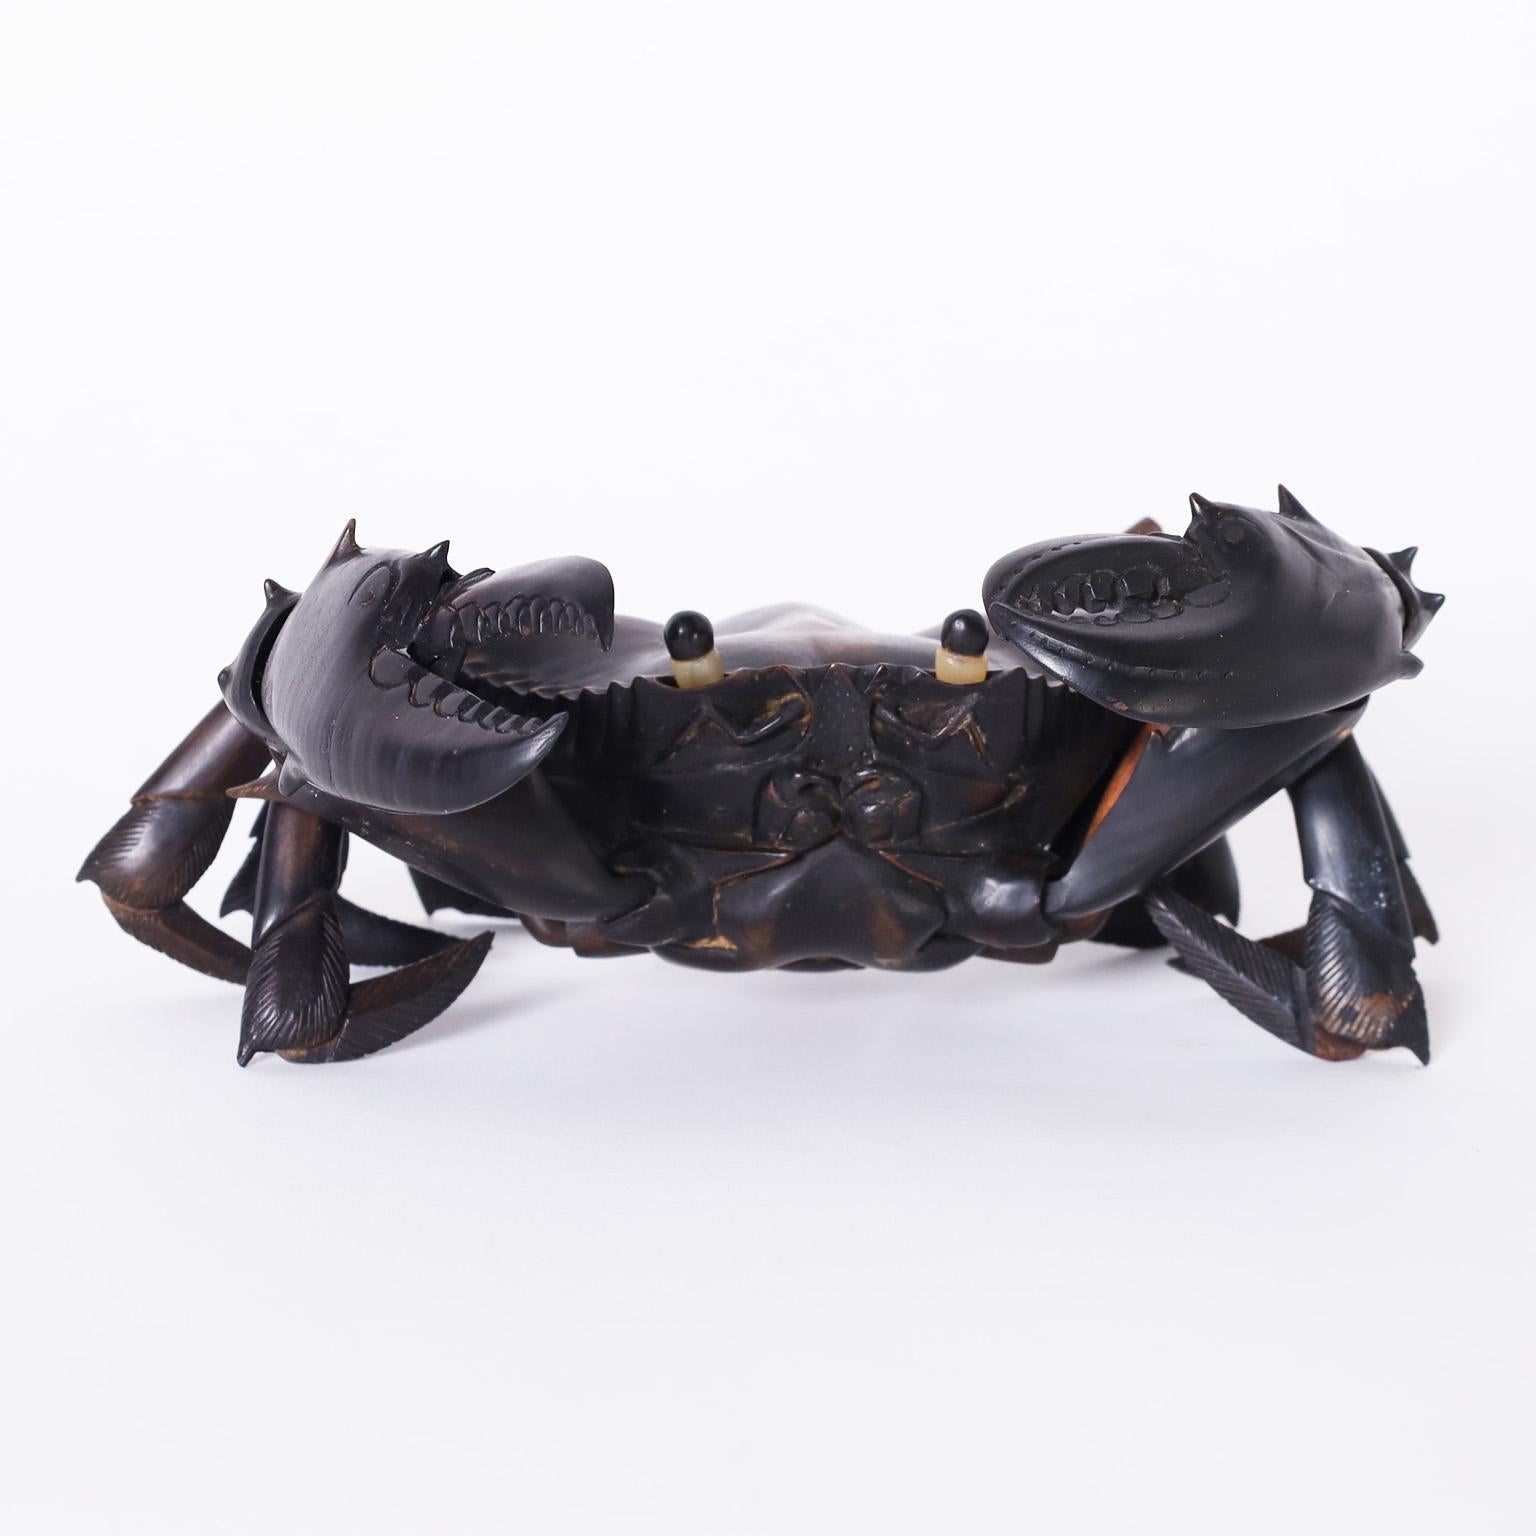 Rare life size, life like crab sculpture or object of art crafted in ebony with articulated joint movements and an assertive attitude.